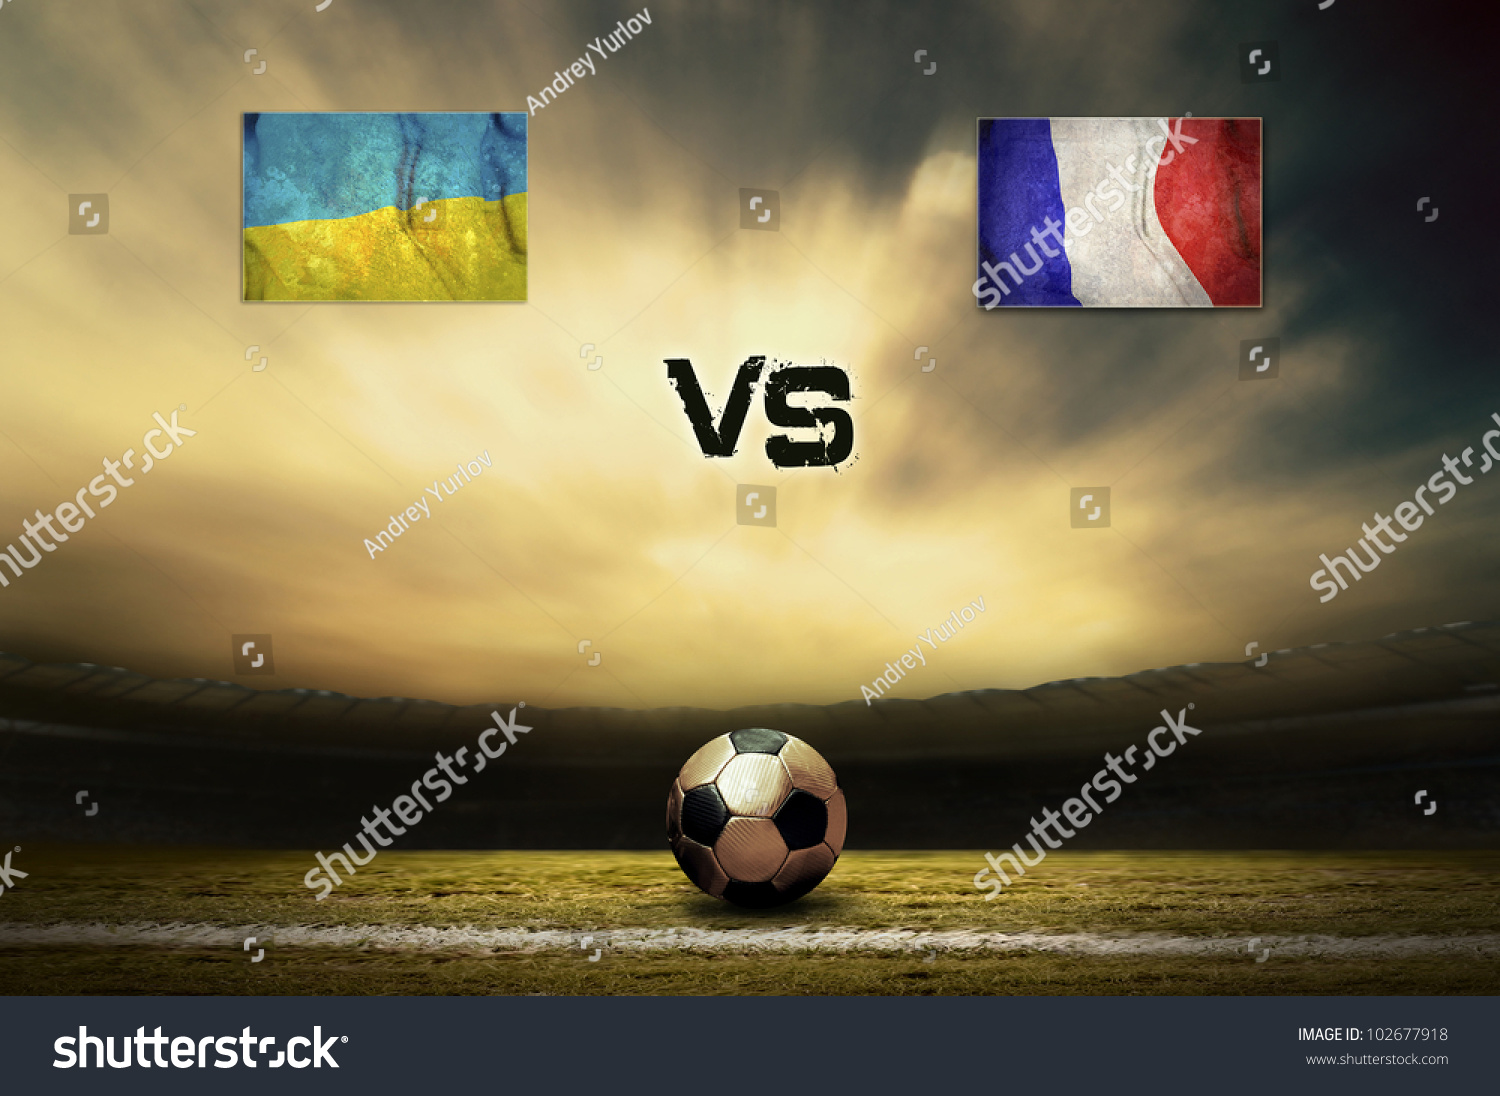 Friendly soccer match between Ukraine and France #102677918